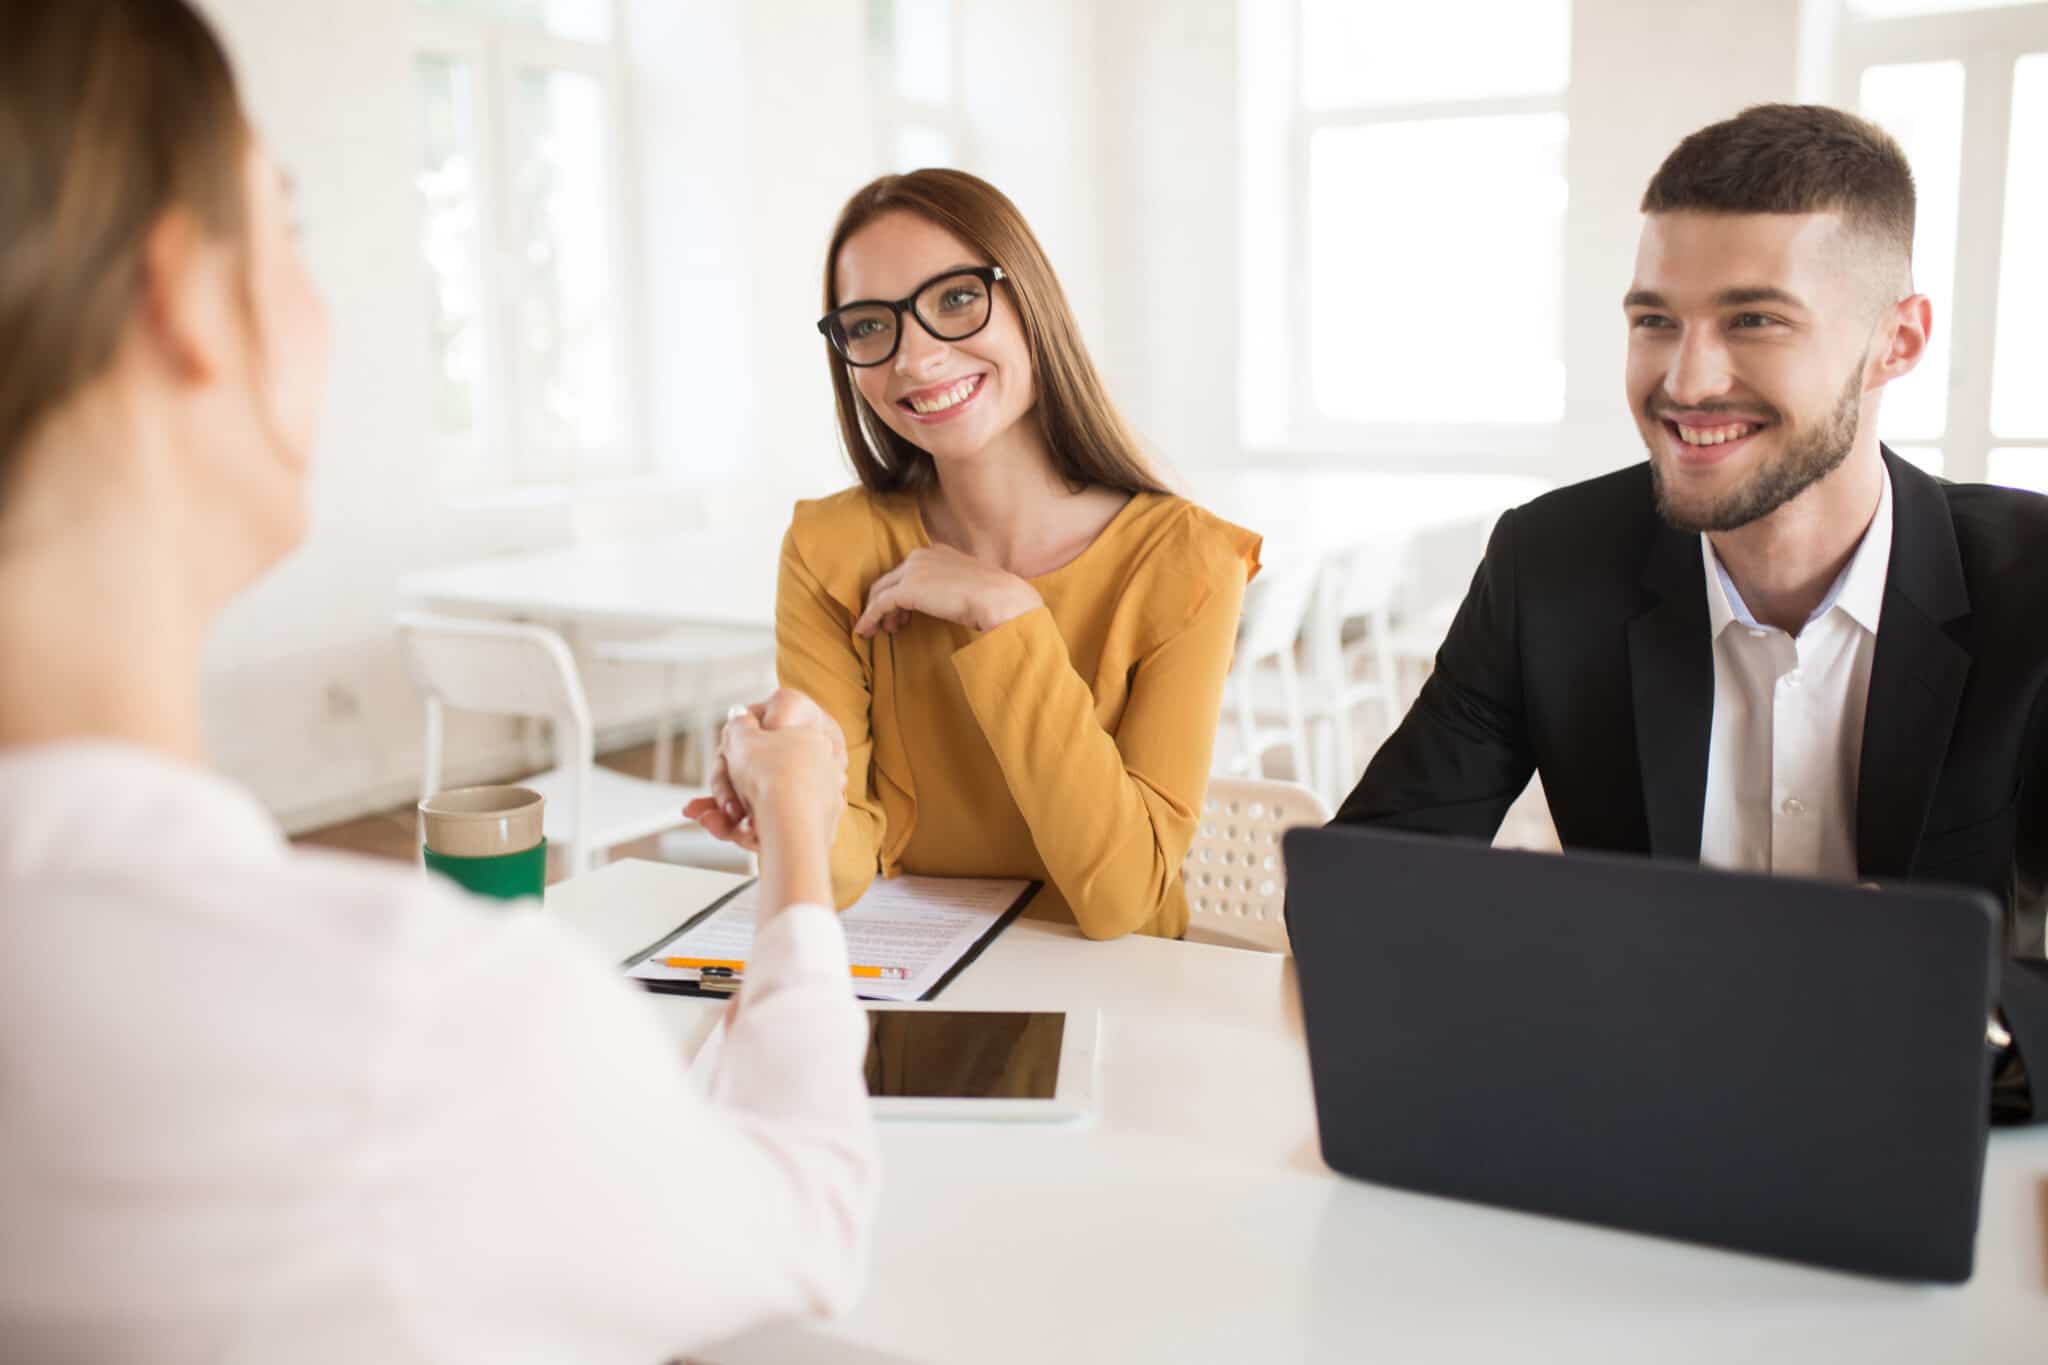 Smiling business woman in eyeglasses happily shaking applicant hand with business man near. Young joyful employers spending job interview in modern office